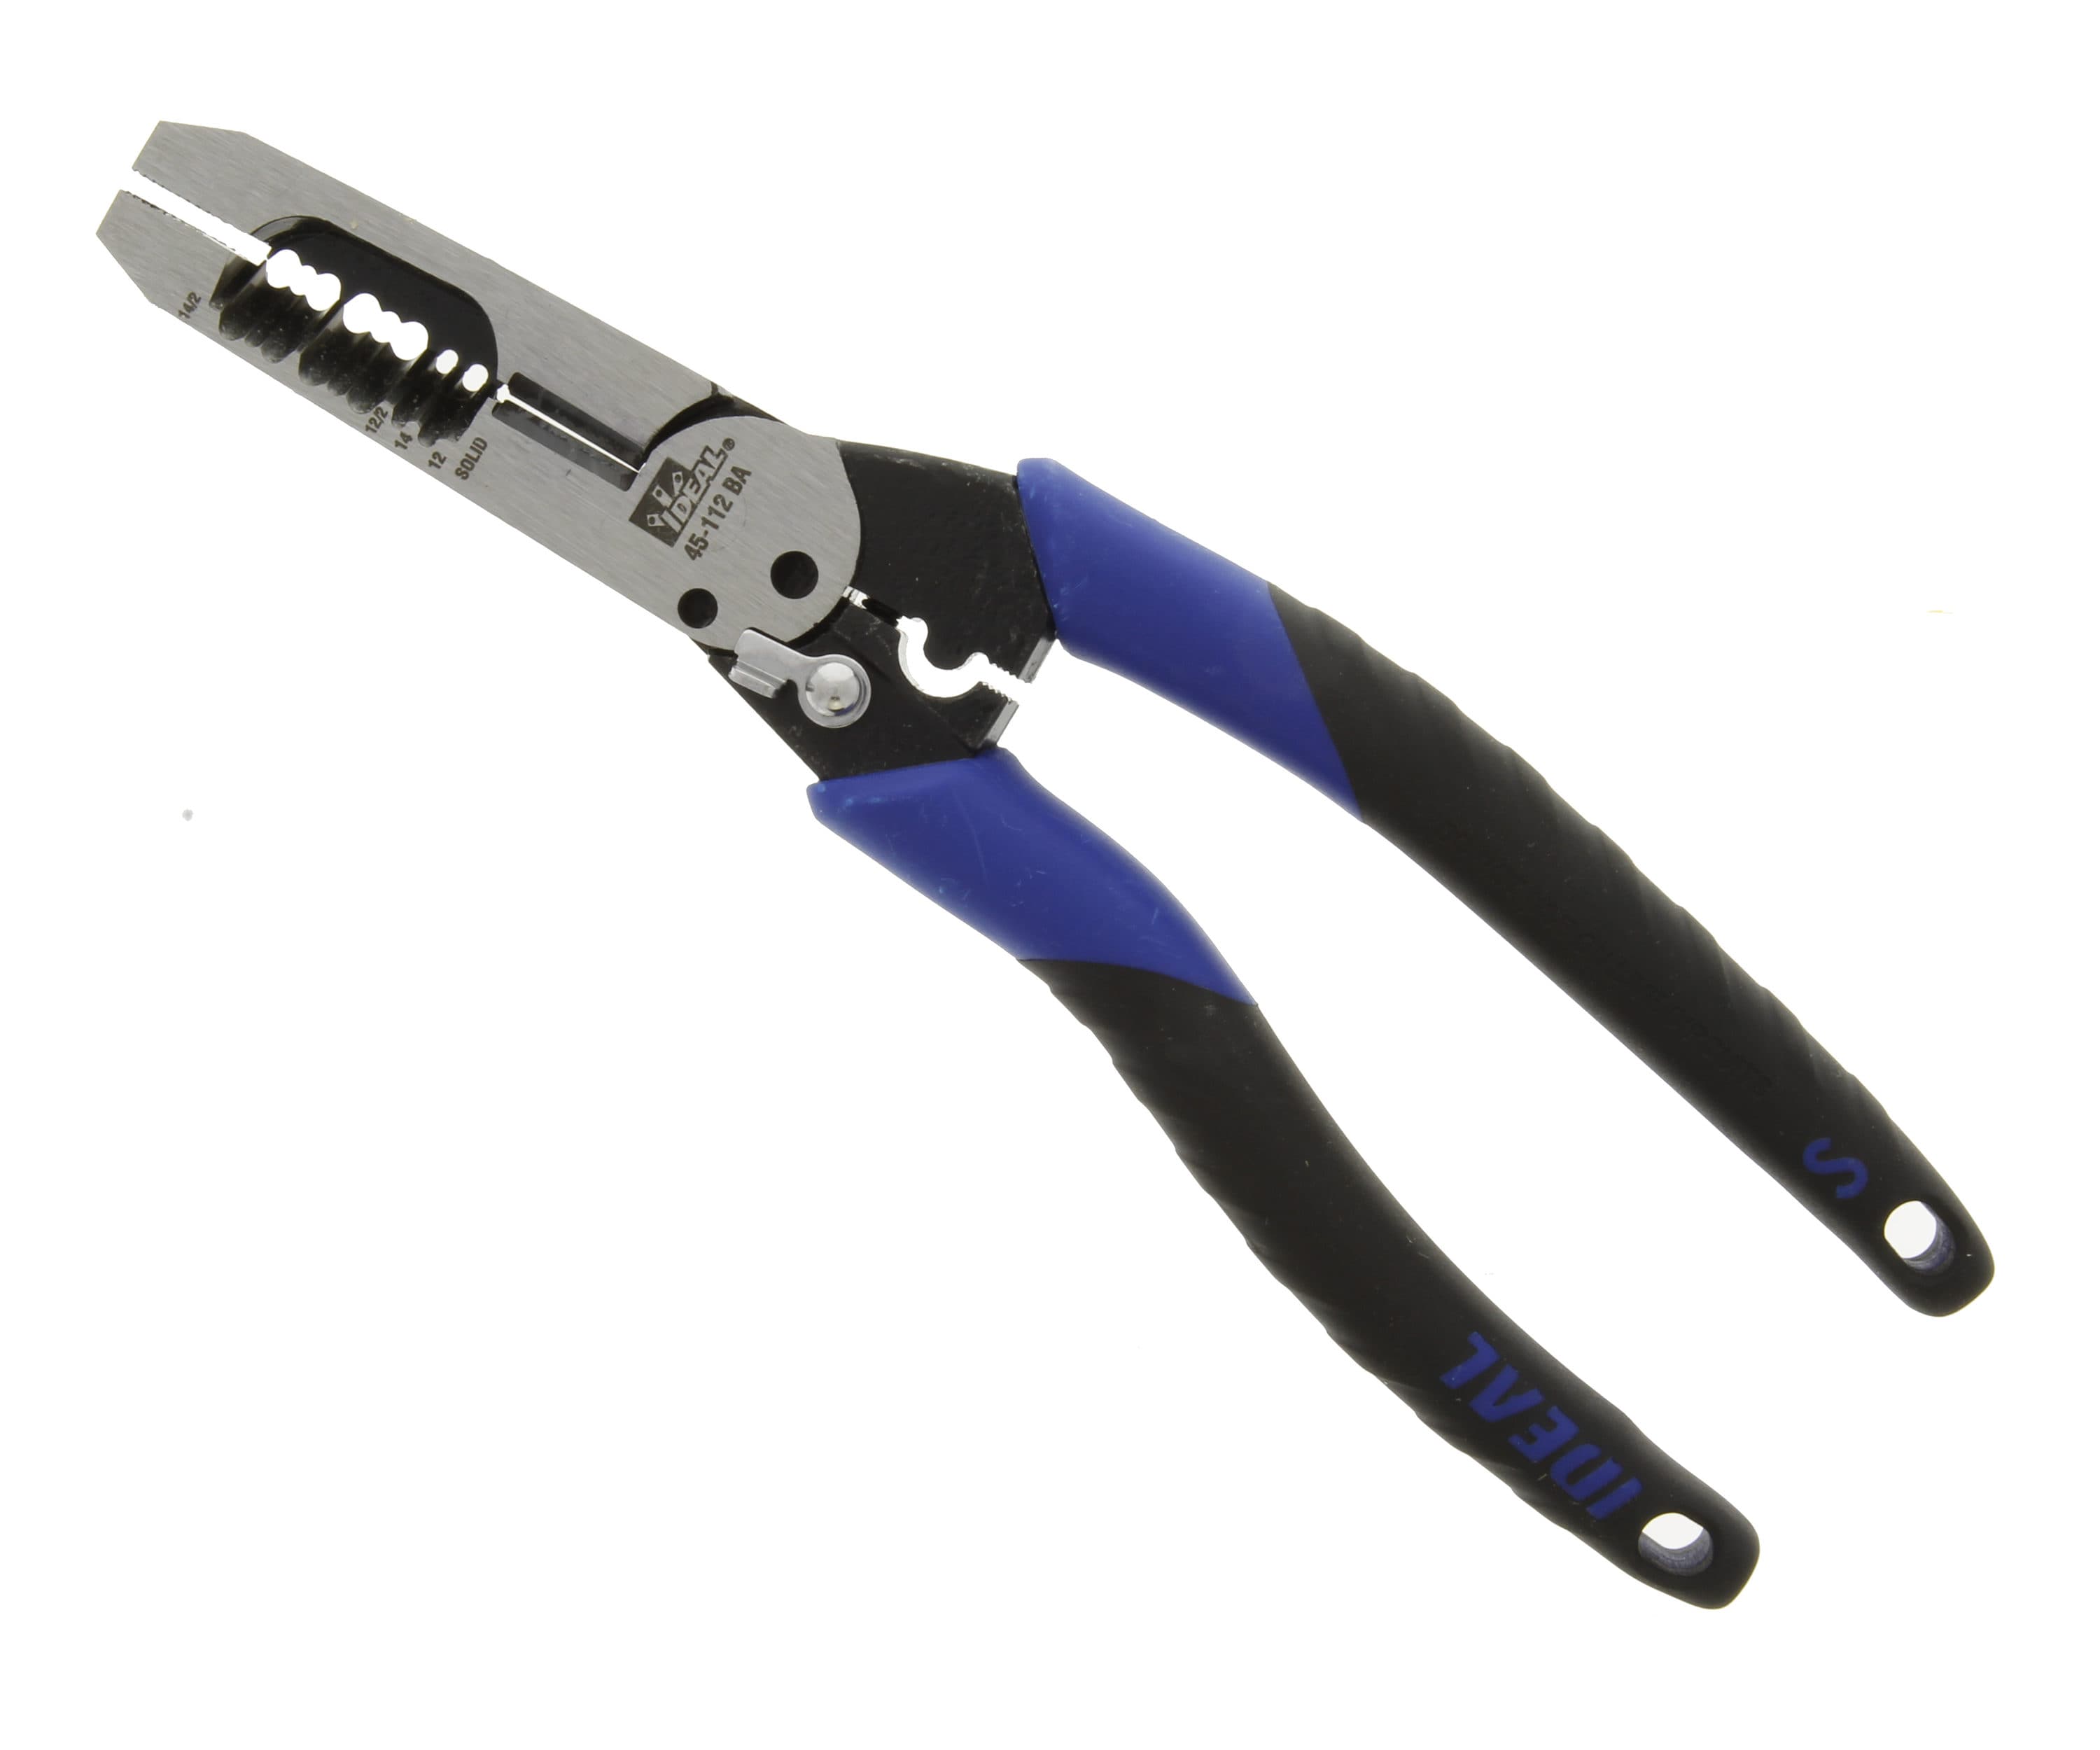 IDEAL Wire Stripper/Cutter/Crimper, 12-14 Awg Solid, 12-14 Awg